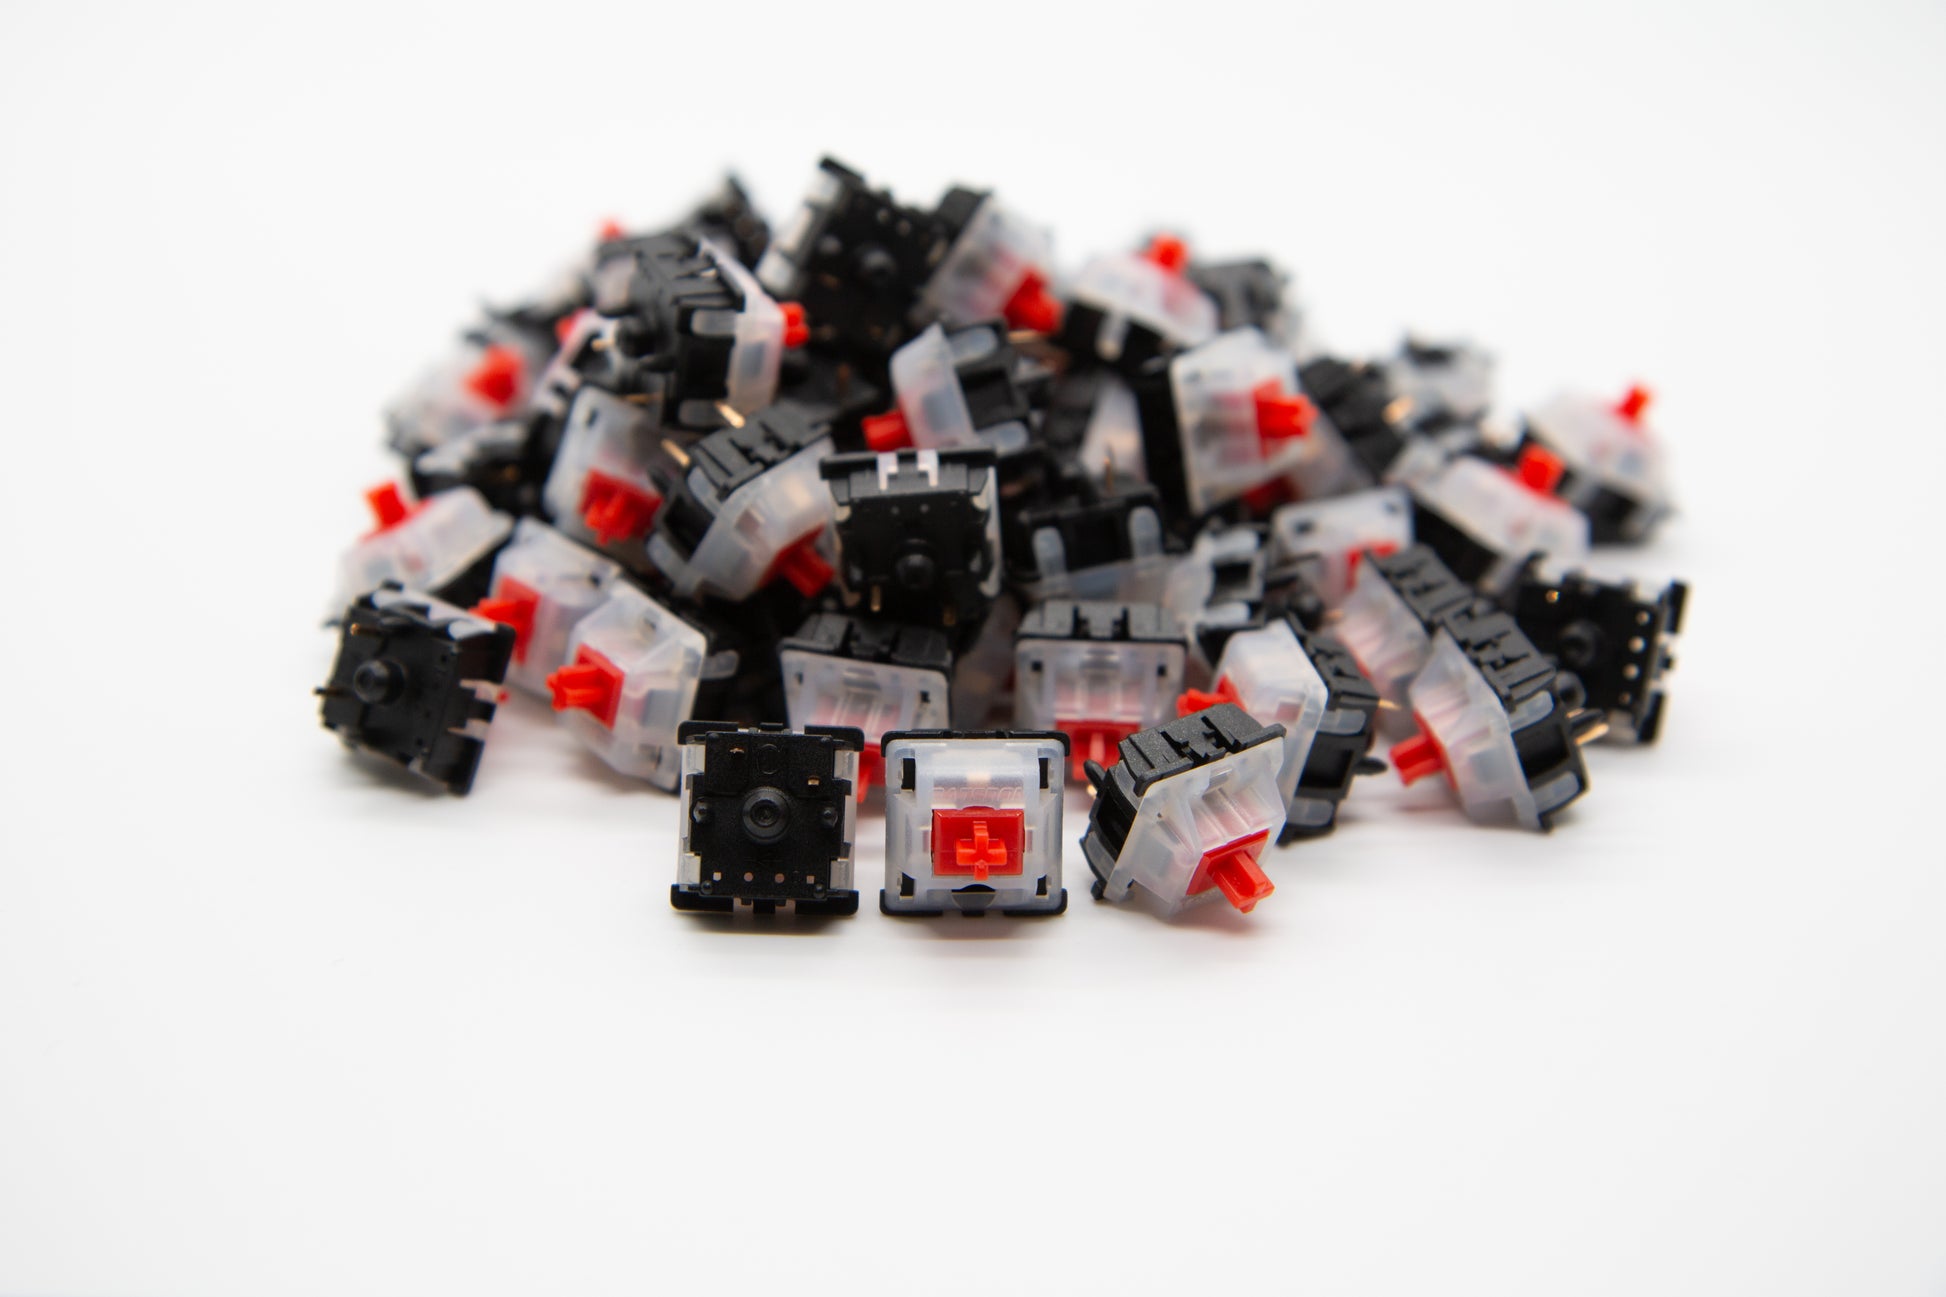 Close-up shot of a pile of Gateron Red mechanical keyboard switches featuring black and white housing and red stems